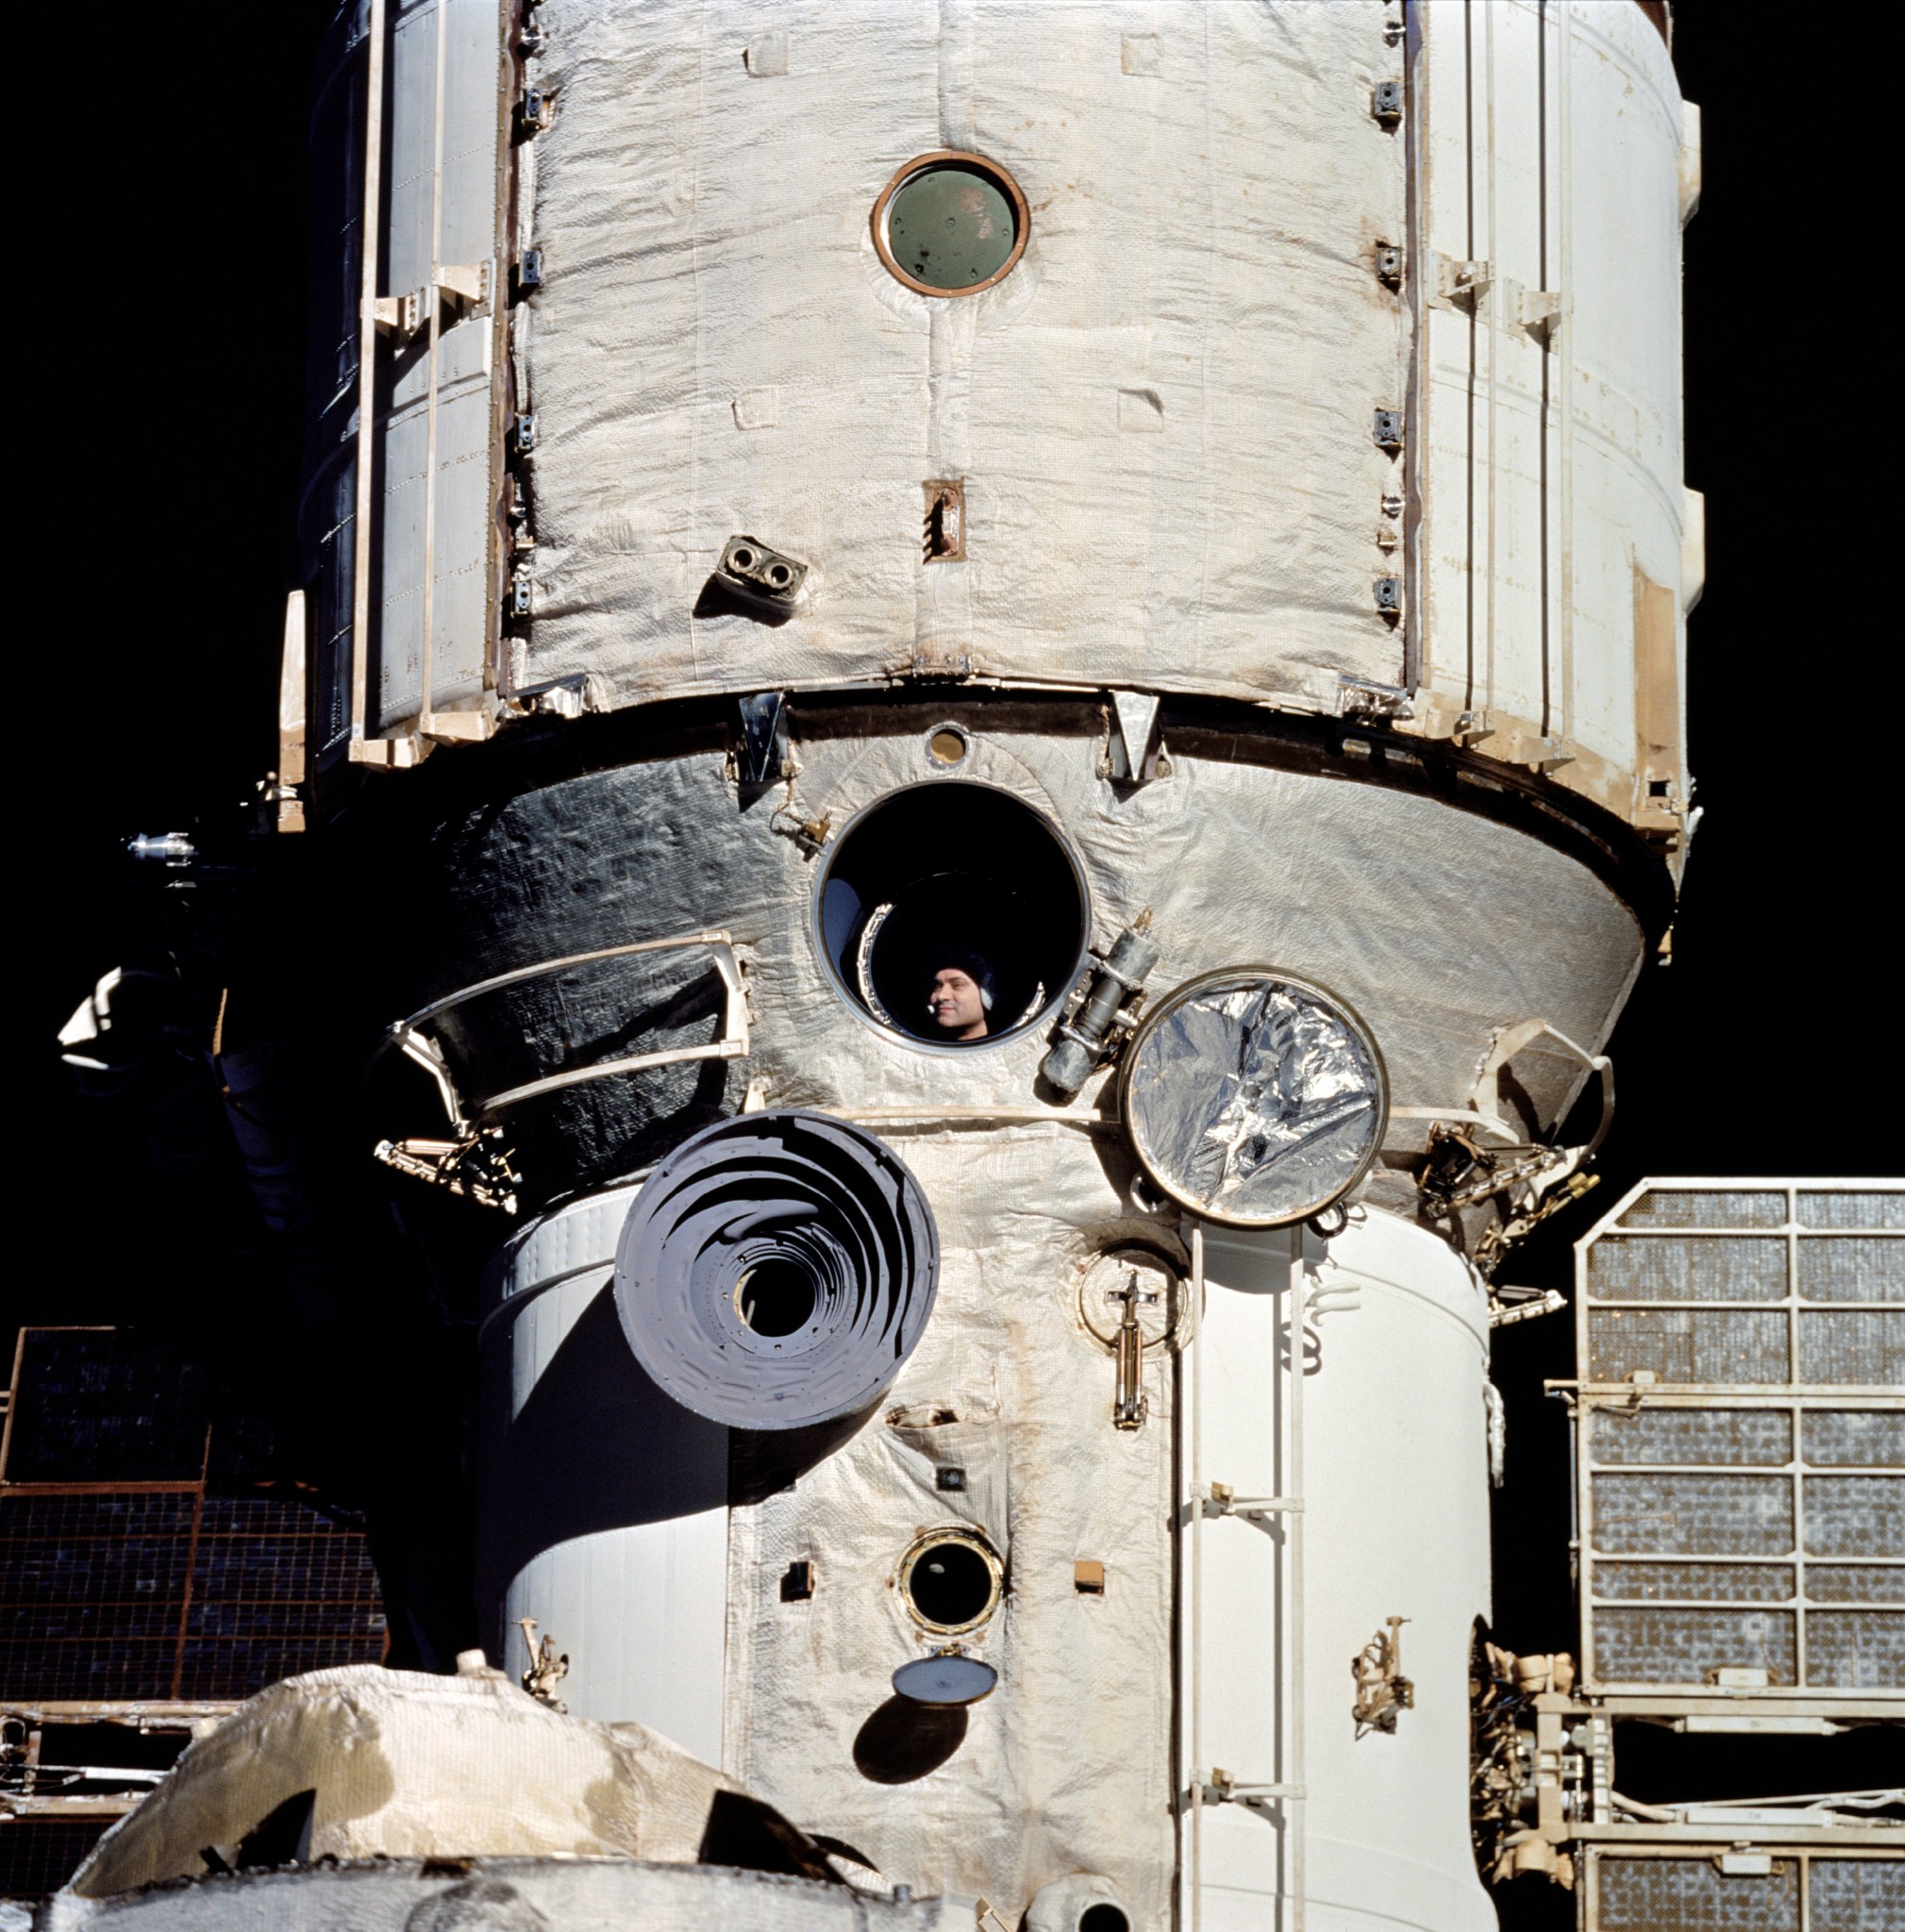 Cosmonaut Valeriy V. Polyakov, who boarded Russia's Mir space station on January 8, 1994, looks out Mir's window during rendezvous operations with wth Space Shuttle Discovery during the STS-63 mission.